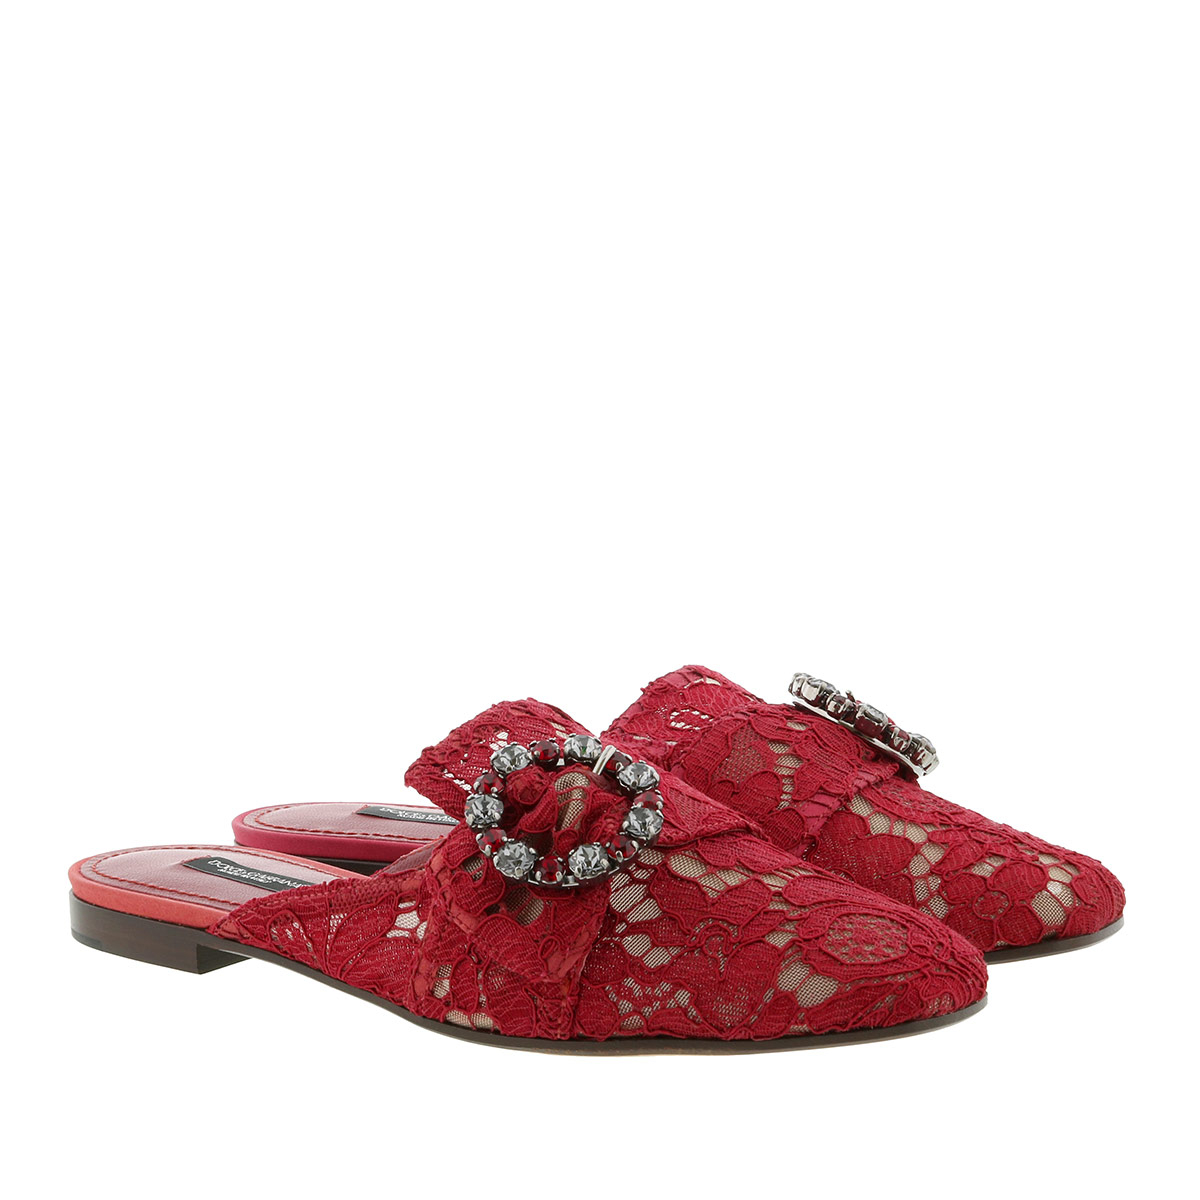 Dolce&Gabbana Schuhe - Lace With Jewel Buckle Slippers Rosso Scuro - in rot - für Damen